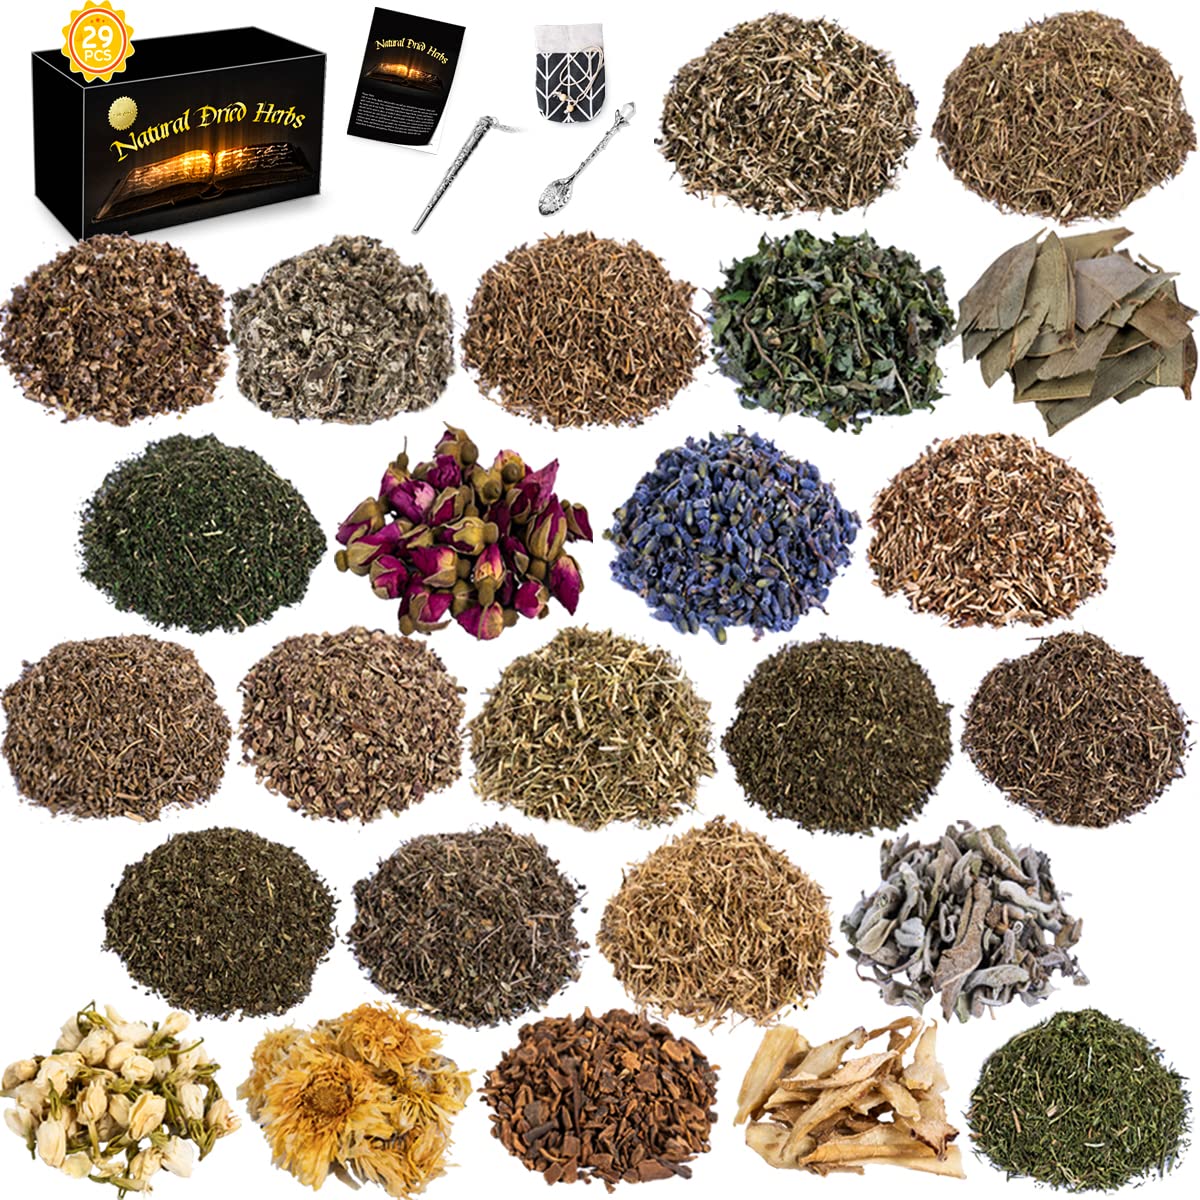  36Pcs Dried Herbs for Witchcraft, Witchcraft Supplies for Witch  Spells, Pagan, Rituals, Wiccan Supplies and Tools Gifts for Beginner  Experienced : Home & Kitchen